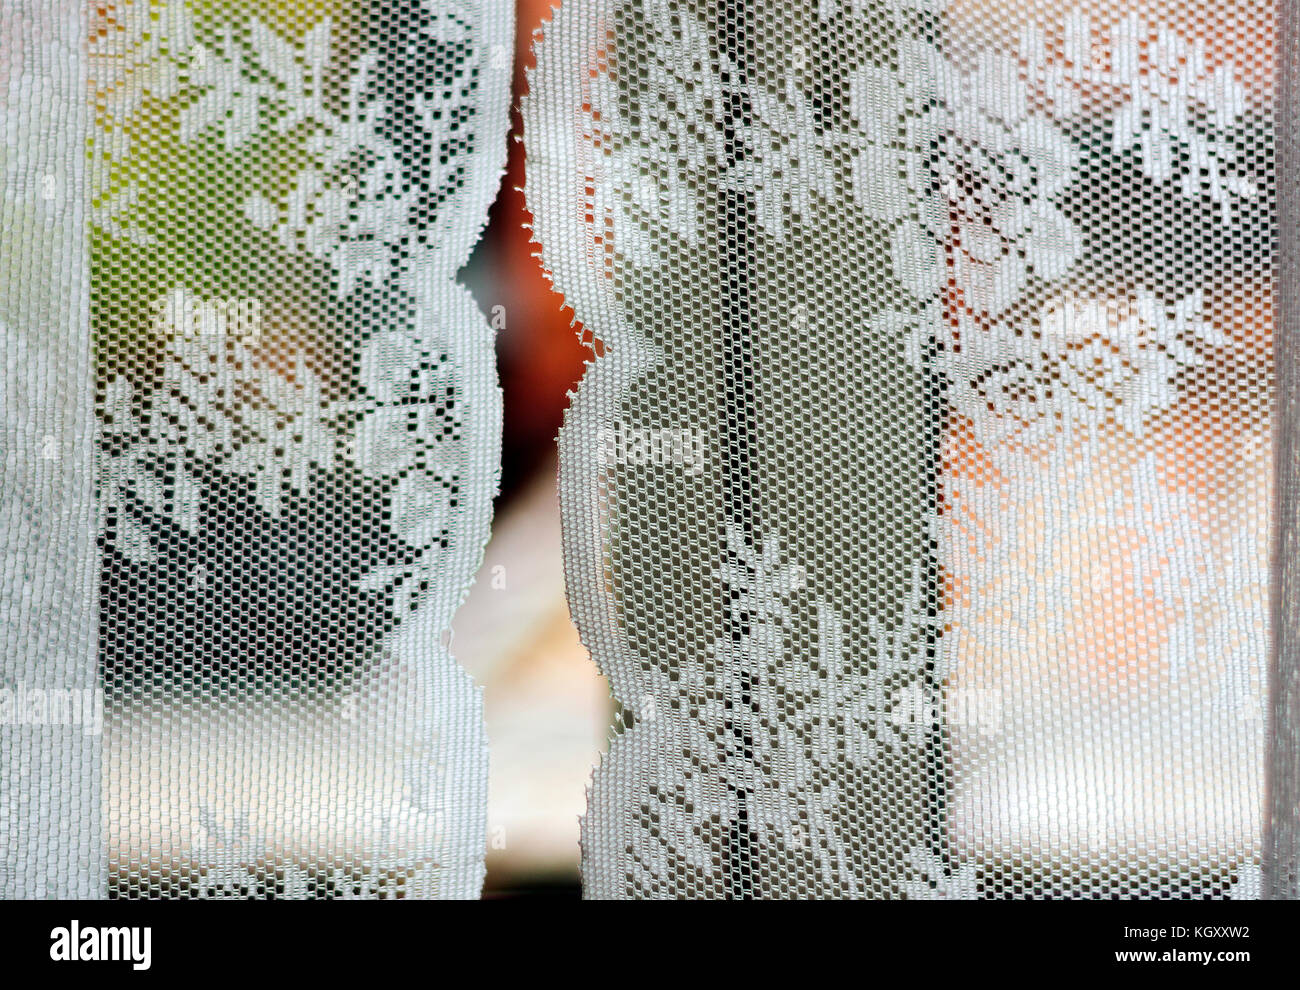 see through decorated curtains with white floral texture Stock Photo